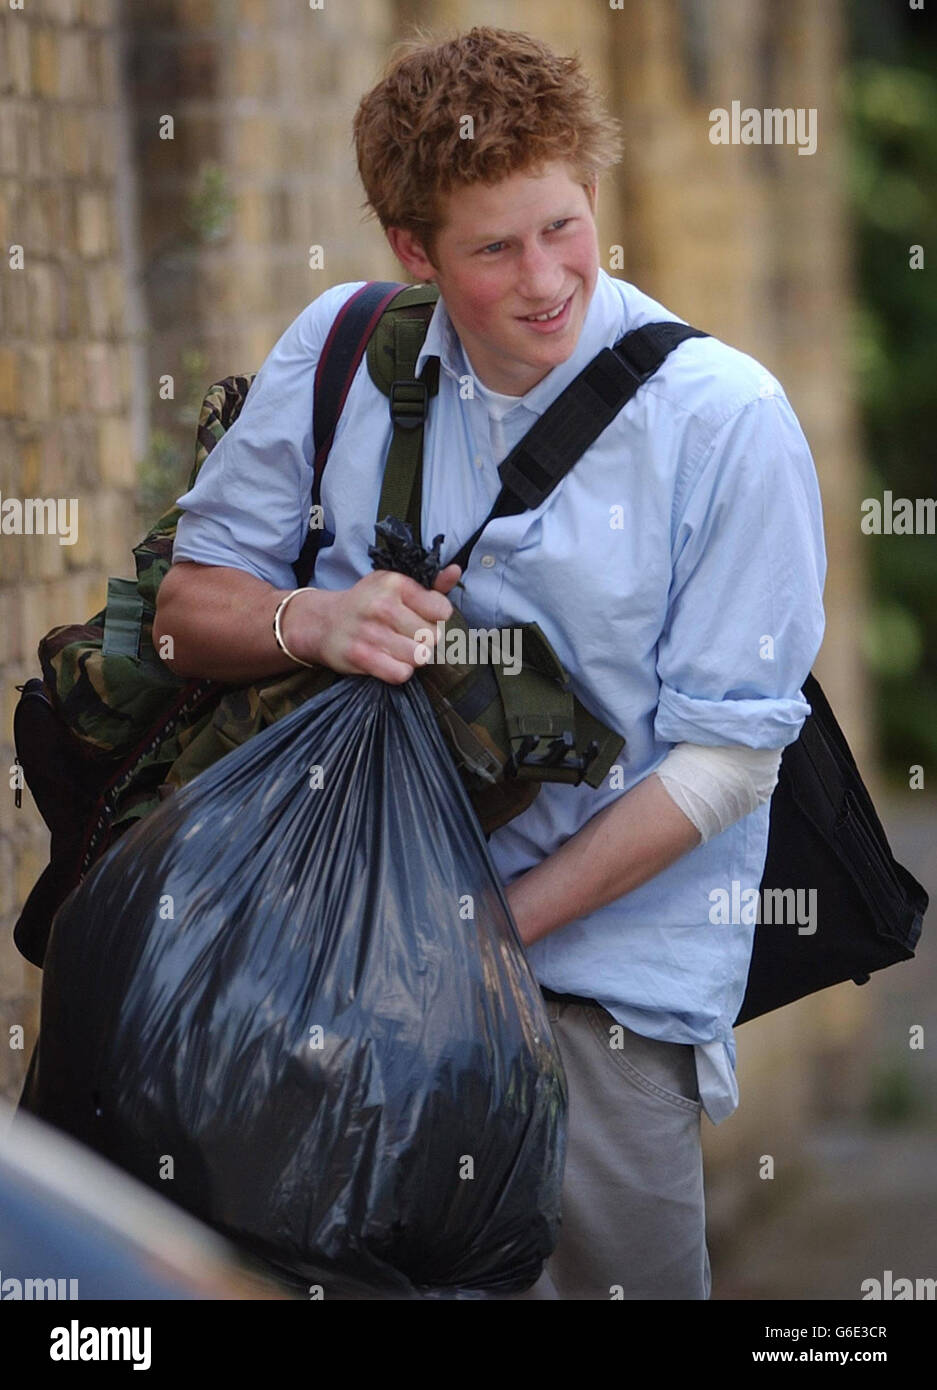 Prince Harry, the younger son of the Prince of Wales, carries his belongings to a car as he leaves Eton College on his last day at the top public school where he has been a pupil for five years. * Like his older brother William, Harry has spent his Eton schooldays boarding at Manor House, on the site of the lodgings of probably the most famous Old Etonian of them all, victor of Waterloo, the Duke of Wellington. It has been announced that Prince Harry is to apply for entry to the Royal Military Academy at Sandhurst. Stock Photo